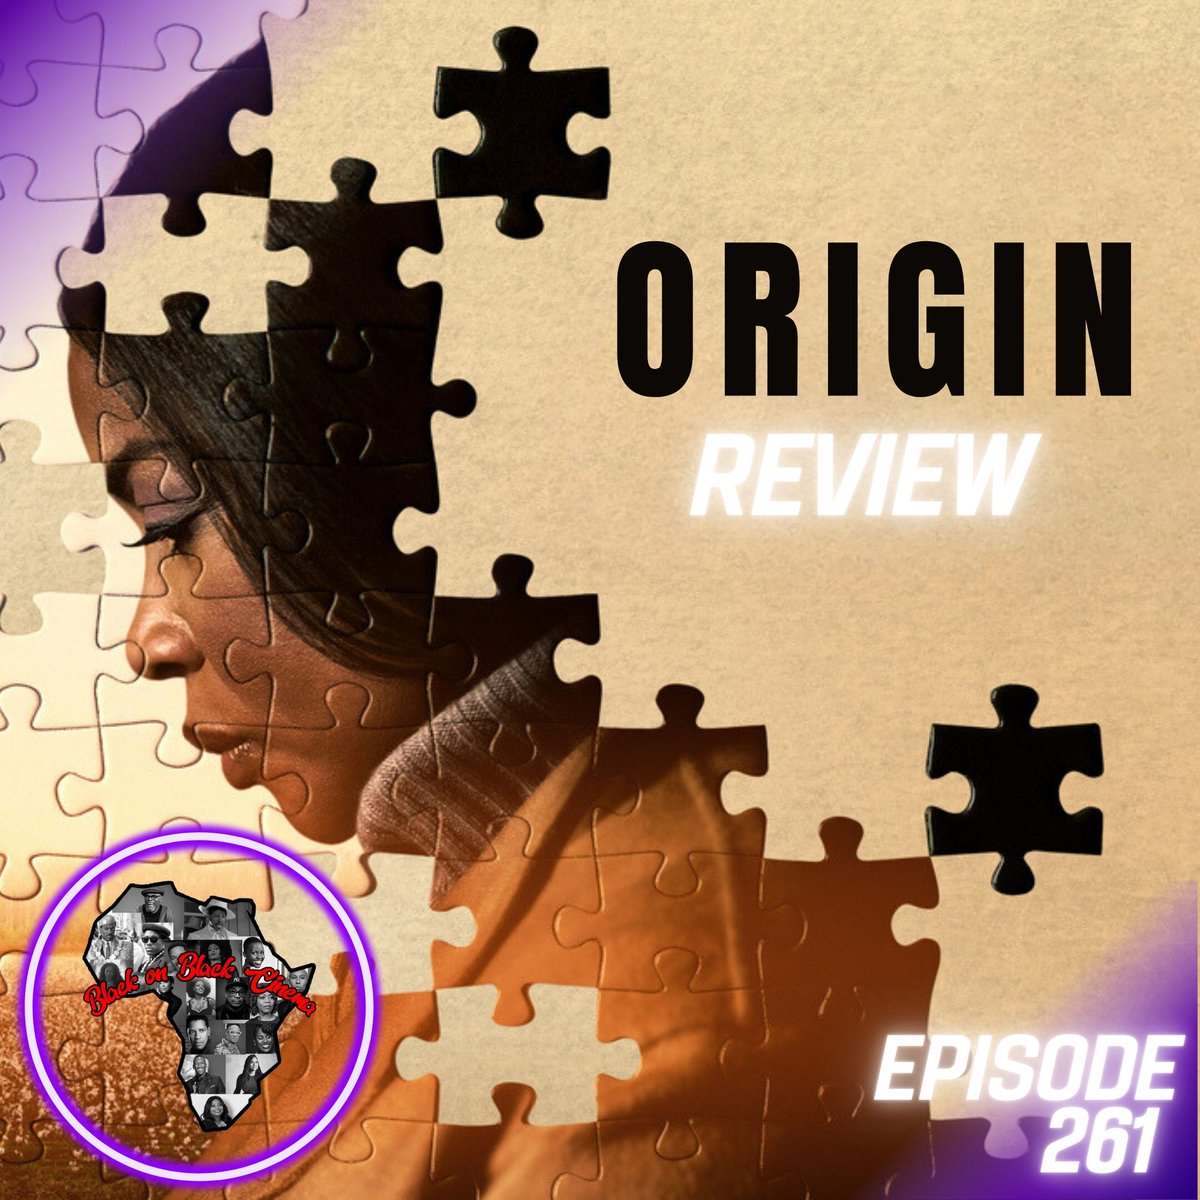 #BlackOnBlackCinema Ep261: #Origin - youtu.be/nj4eoMwzdzM - Directed by #AvaDuVernay. Follows the writing of the book '#Caste: The Origins of Our Discontents' by #IsabelWilkerson and the exploration of the caste system as the origin of oppression of people globally.